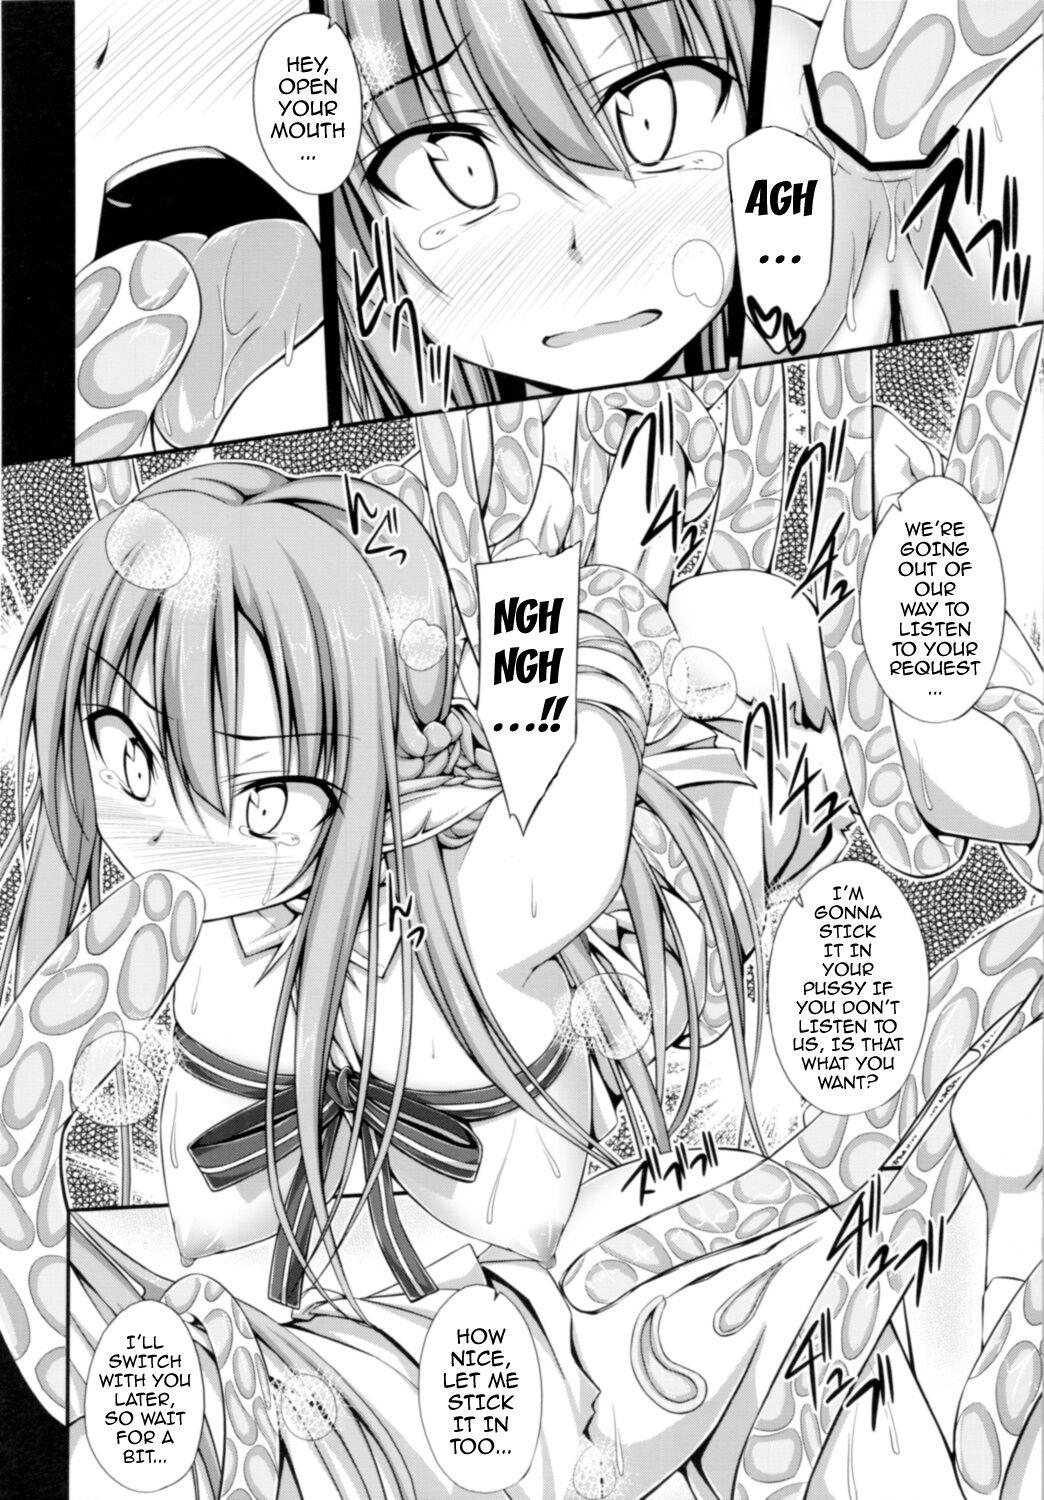 Bald Pussy SLAVE ASUNA ONLINE 2 - Sword art online Pussysex - Page 11